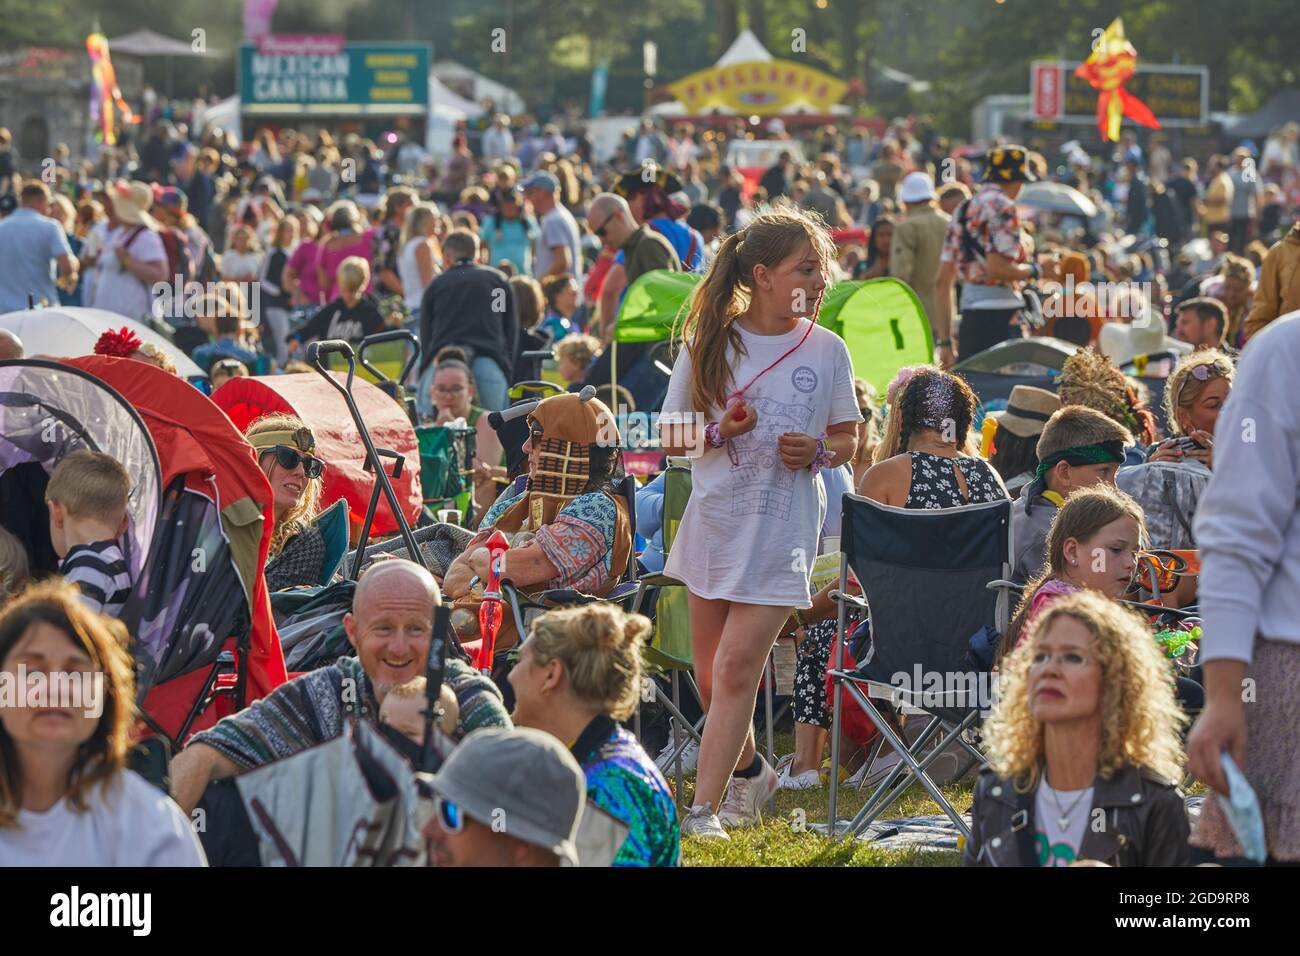 People in the crowd at an outdoor summer music festival. Camp Bestival, Lulworth, Dorset, Great Britain. Stock Photo